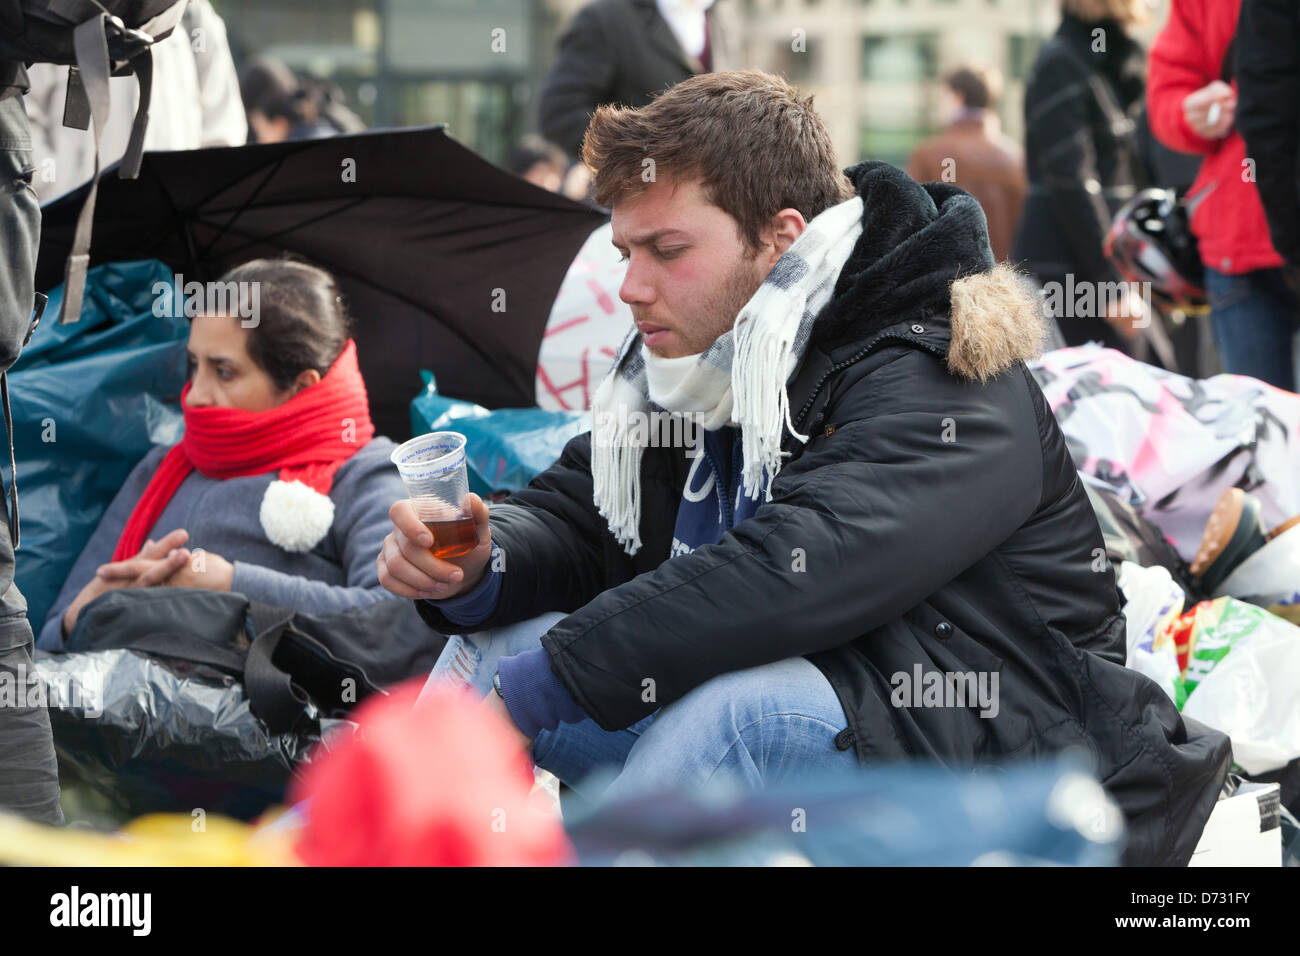 Berlin, Germany, the Refugee hunger strike in front of the Brandenburg Gate Stock Photo